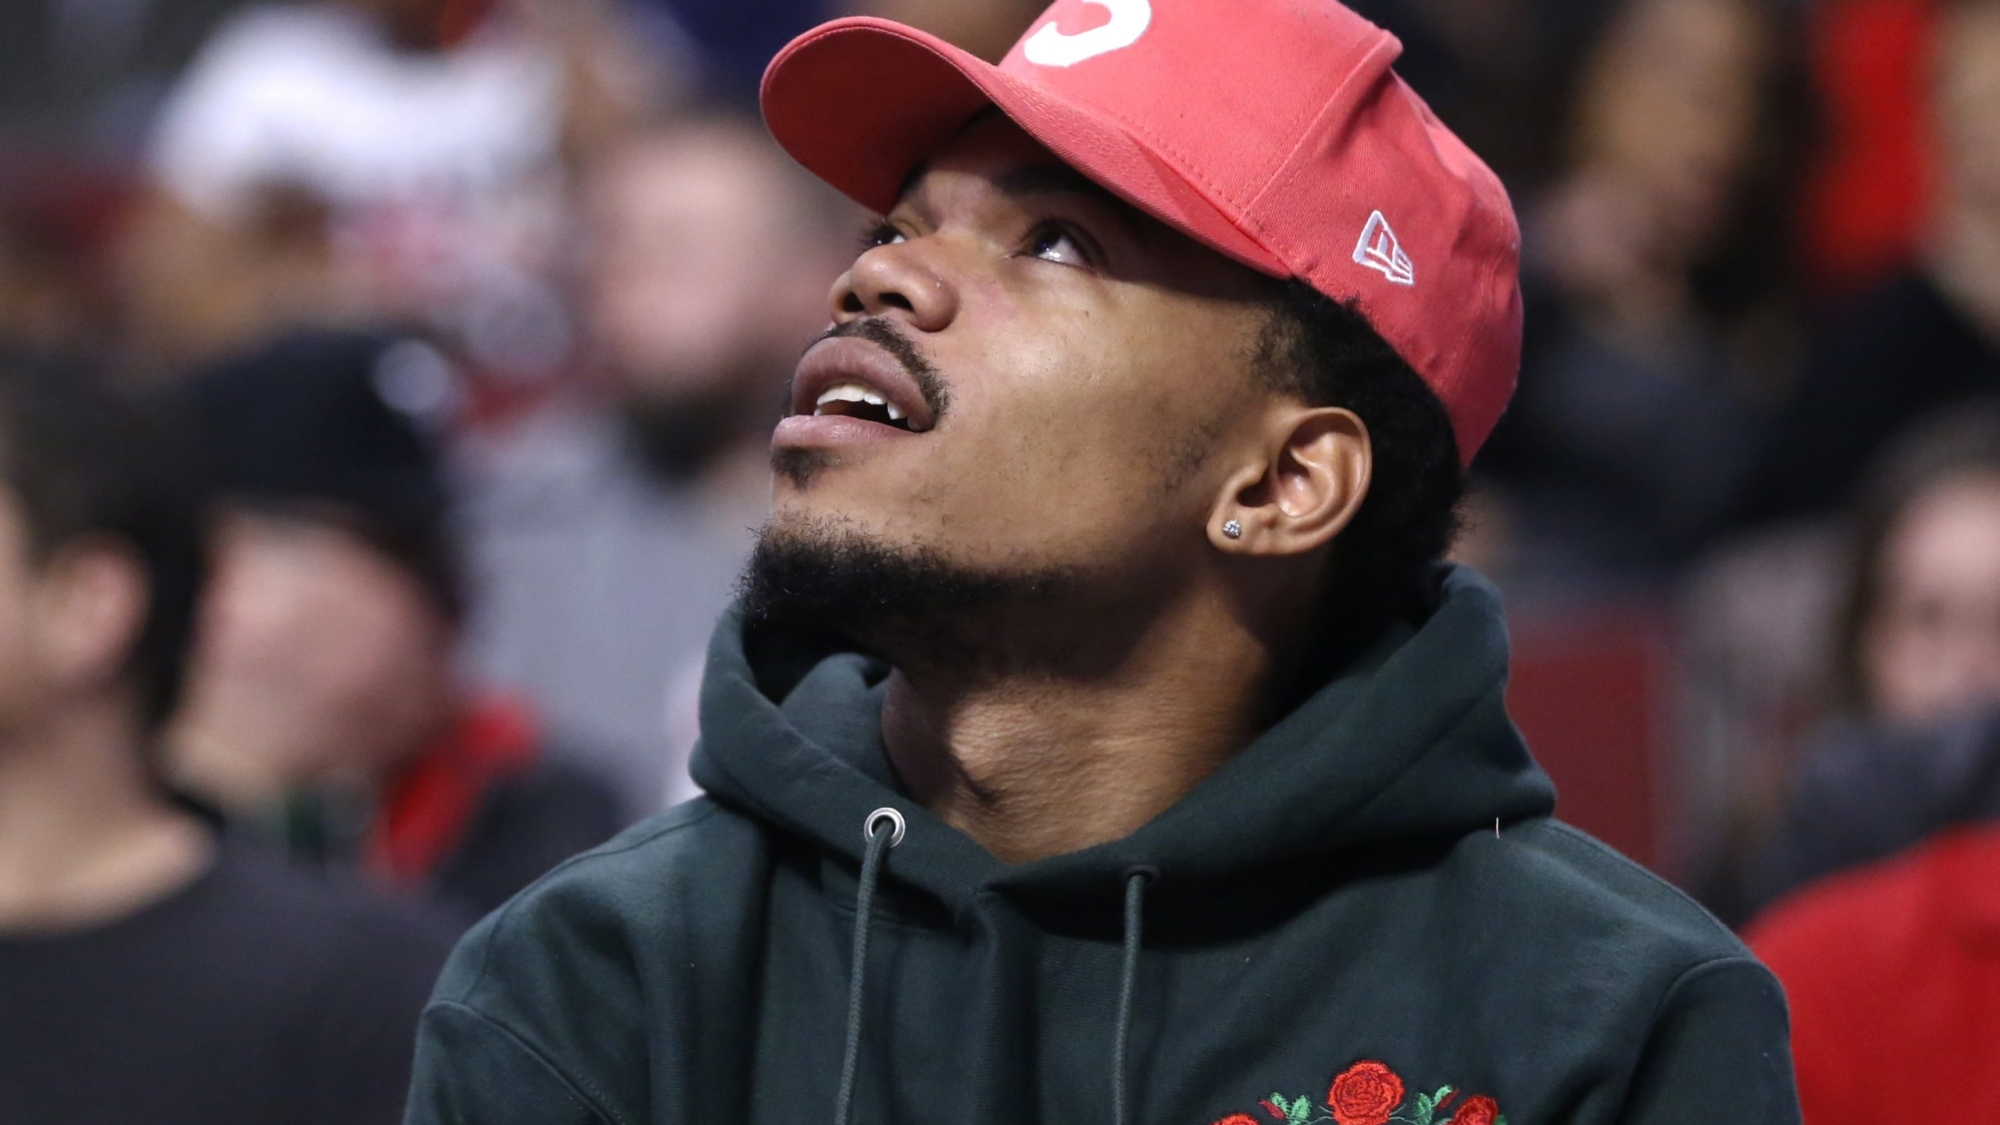 FILE- In this Feb. 24, 2017, file photo, Chance the Rapper takes watches an NBA basketball game between the Chicago Bulls and the Phoenix Suns in Chicago.  Rauner and Grammy-winning artist Chance the Rapper plan to meet this week to discuss funding education in Chicago. The performer from Chicago, whose real name is Chancelor Bennett, said Monday, Feb. 27, on Twitter that he'll meet privately with Rauner on Wednesday. (AP Photo/Charles Rex Arbogast, File)